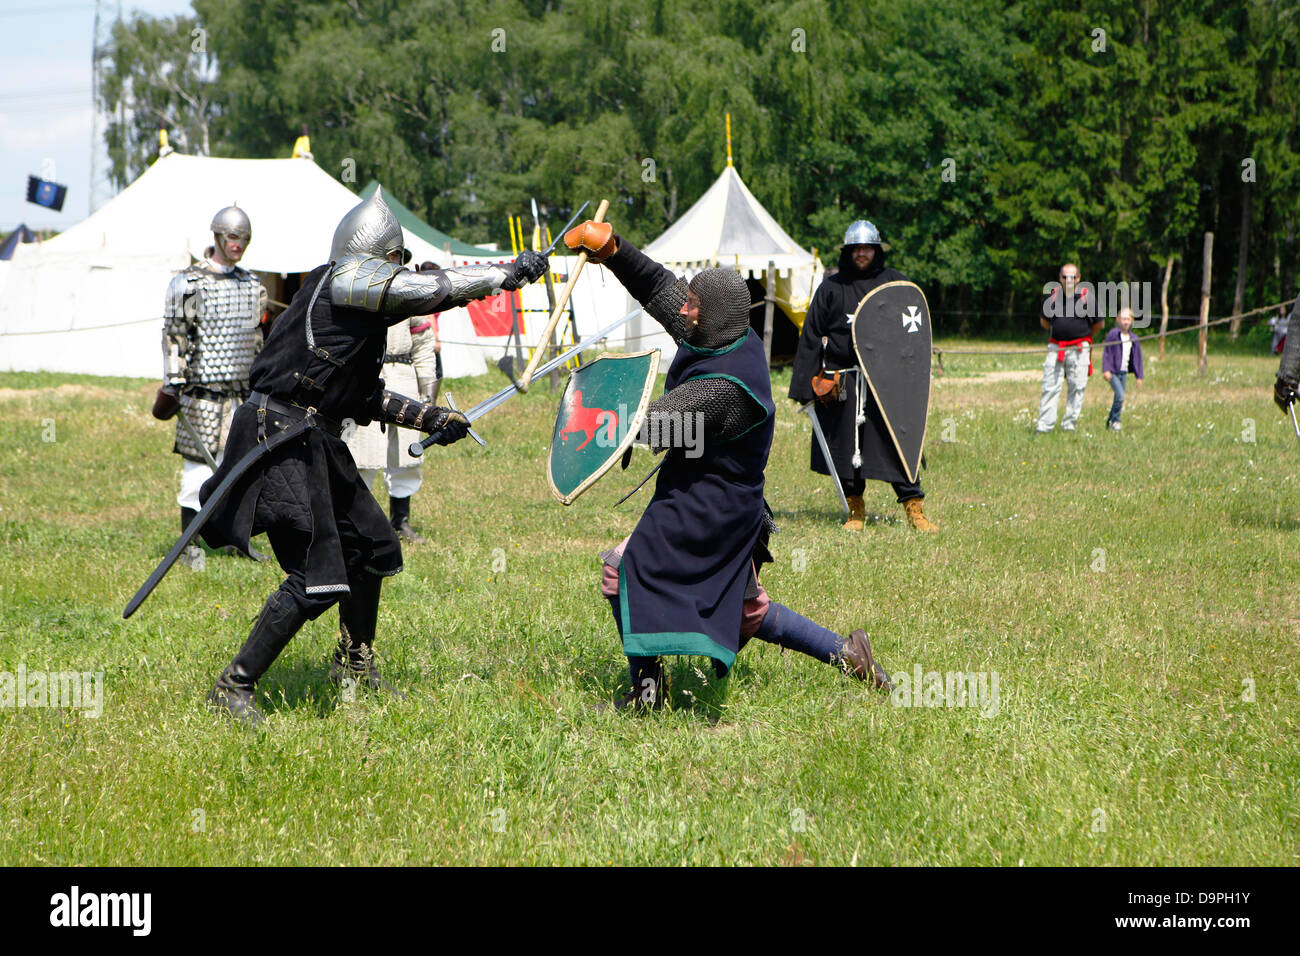 Two medieval european knights armed and fashioned fighting on a battle field Stock Photo